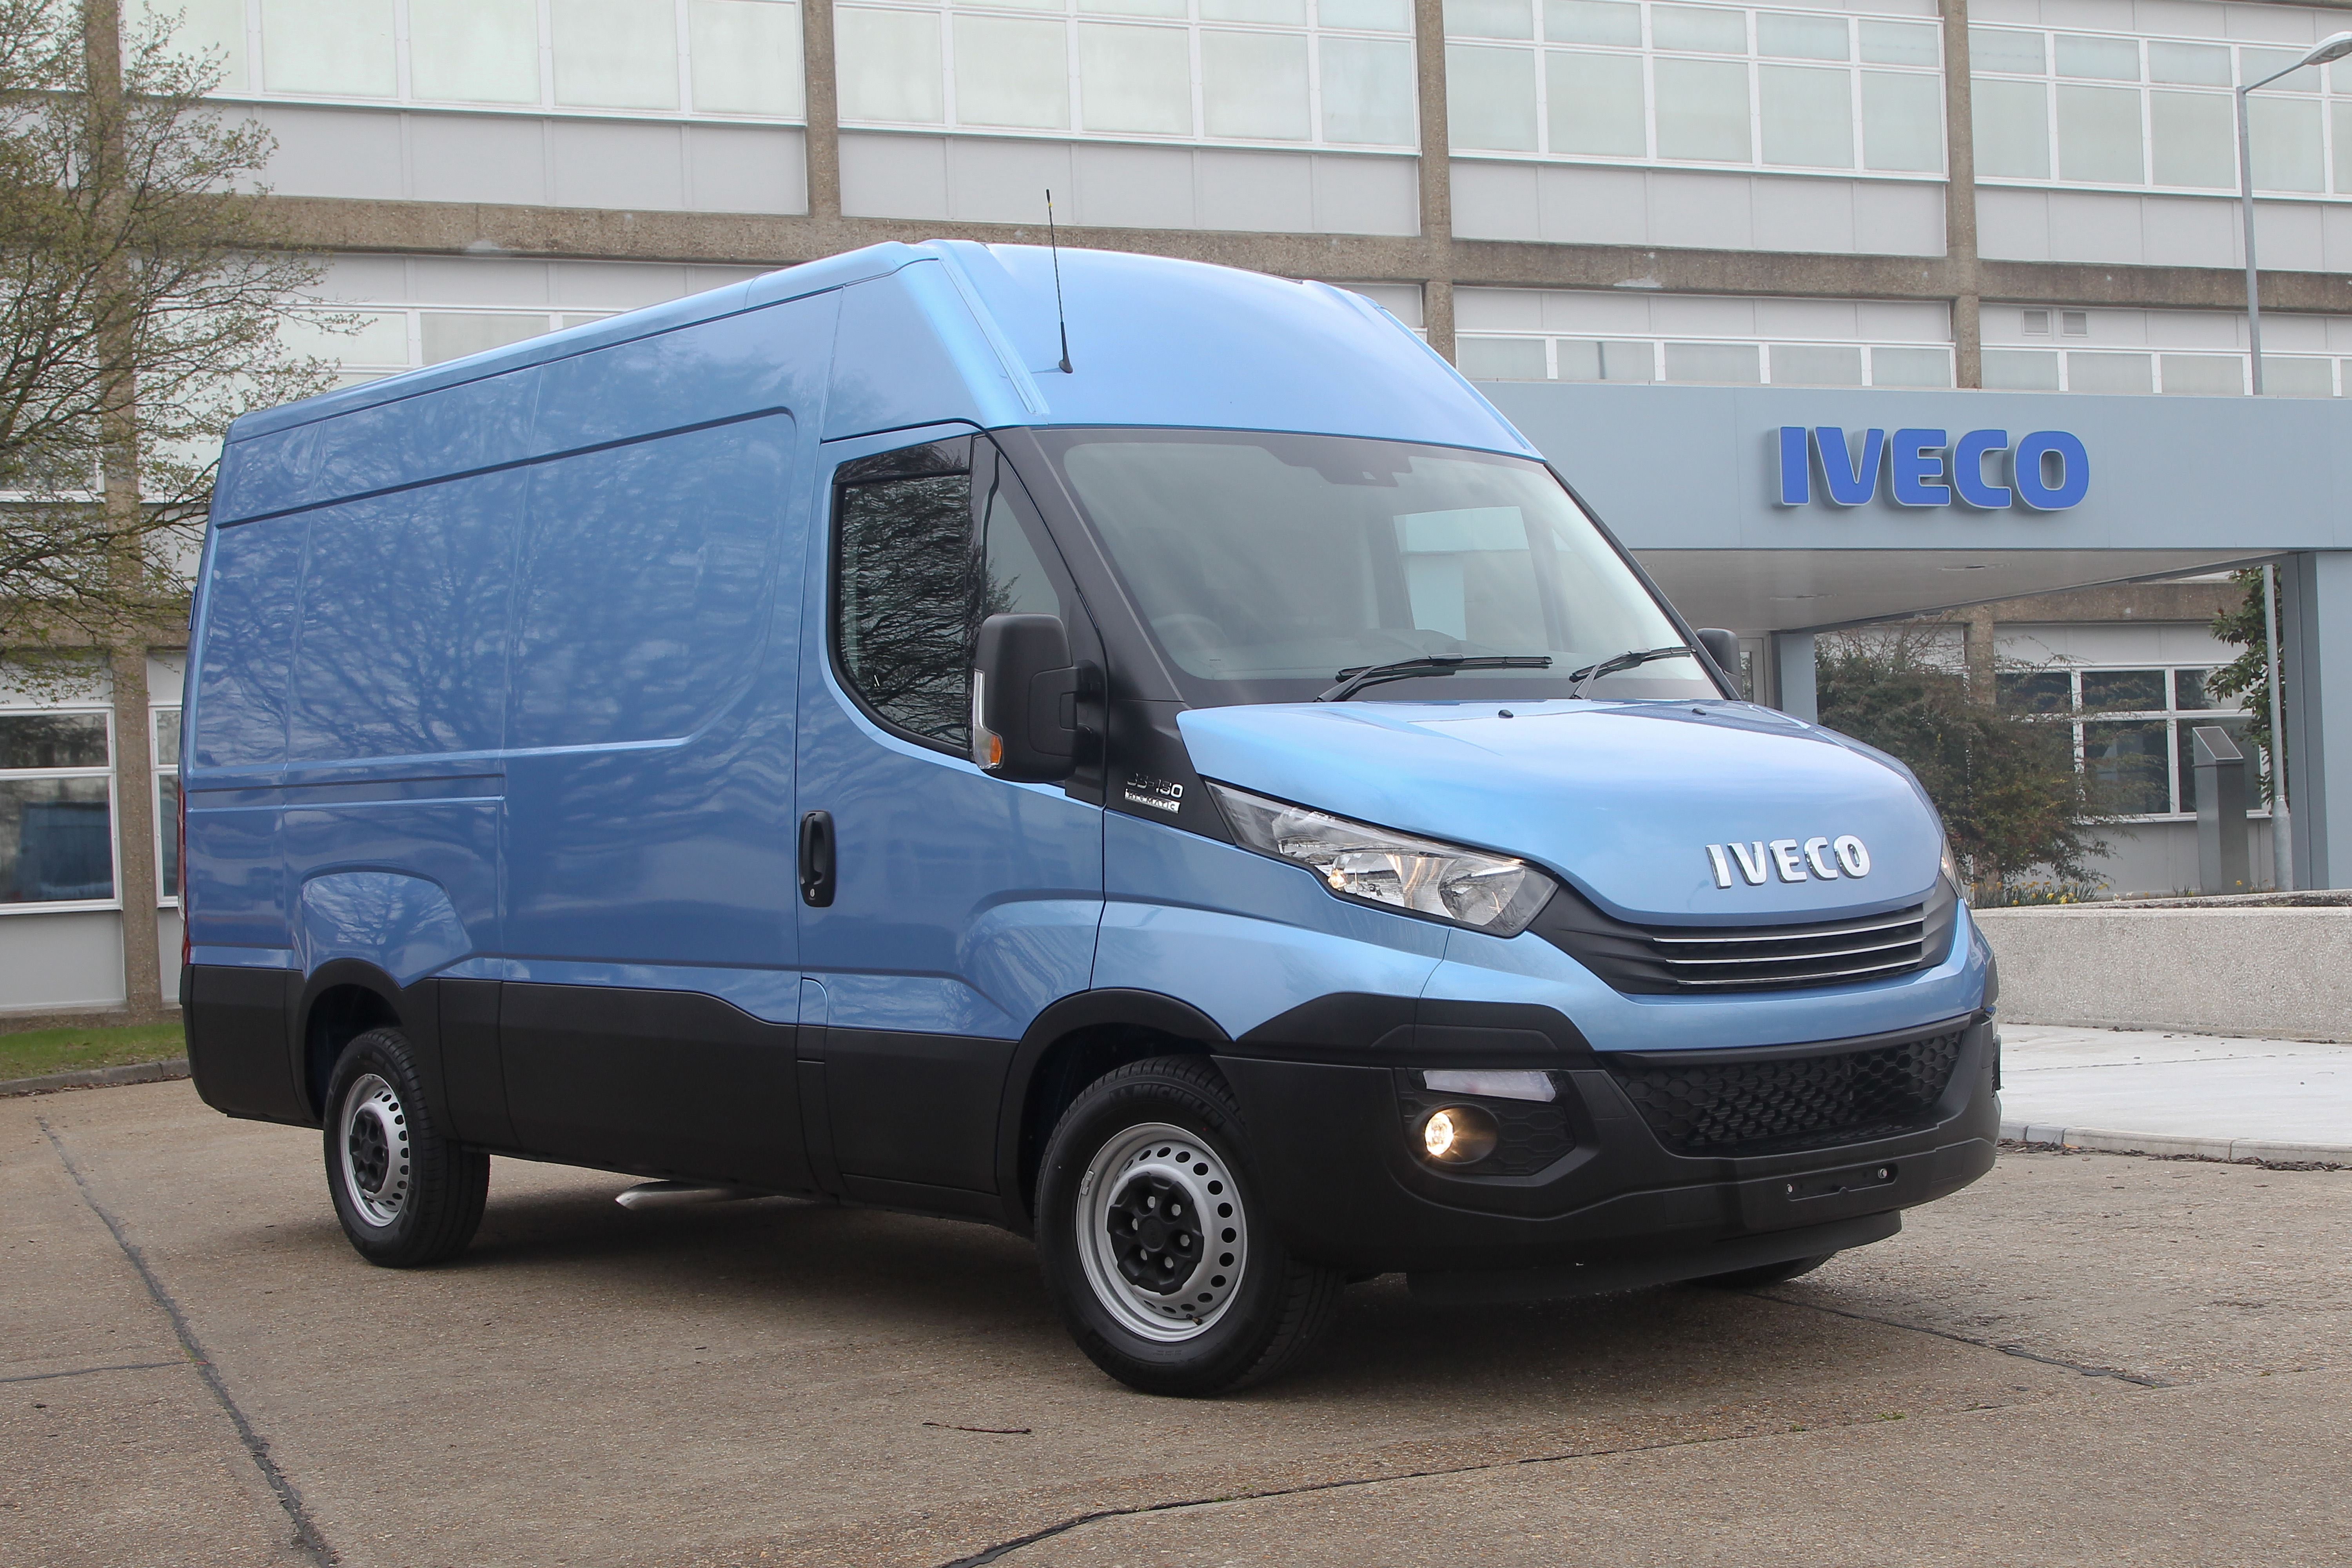 Multi-award-winning Daily reaps further recognition as Euro 6 model wins the coveted Large Van of the Year award